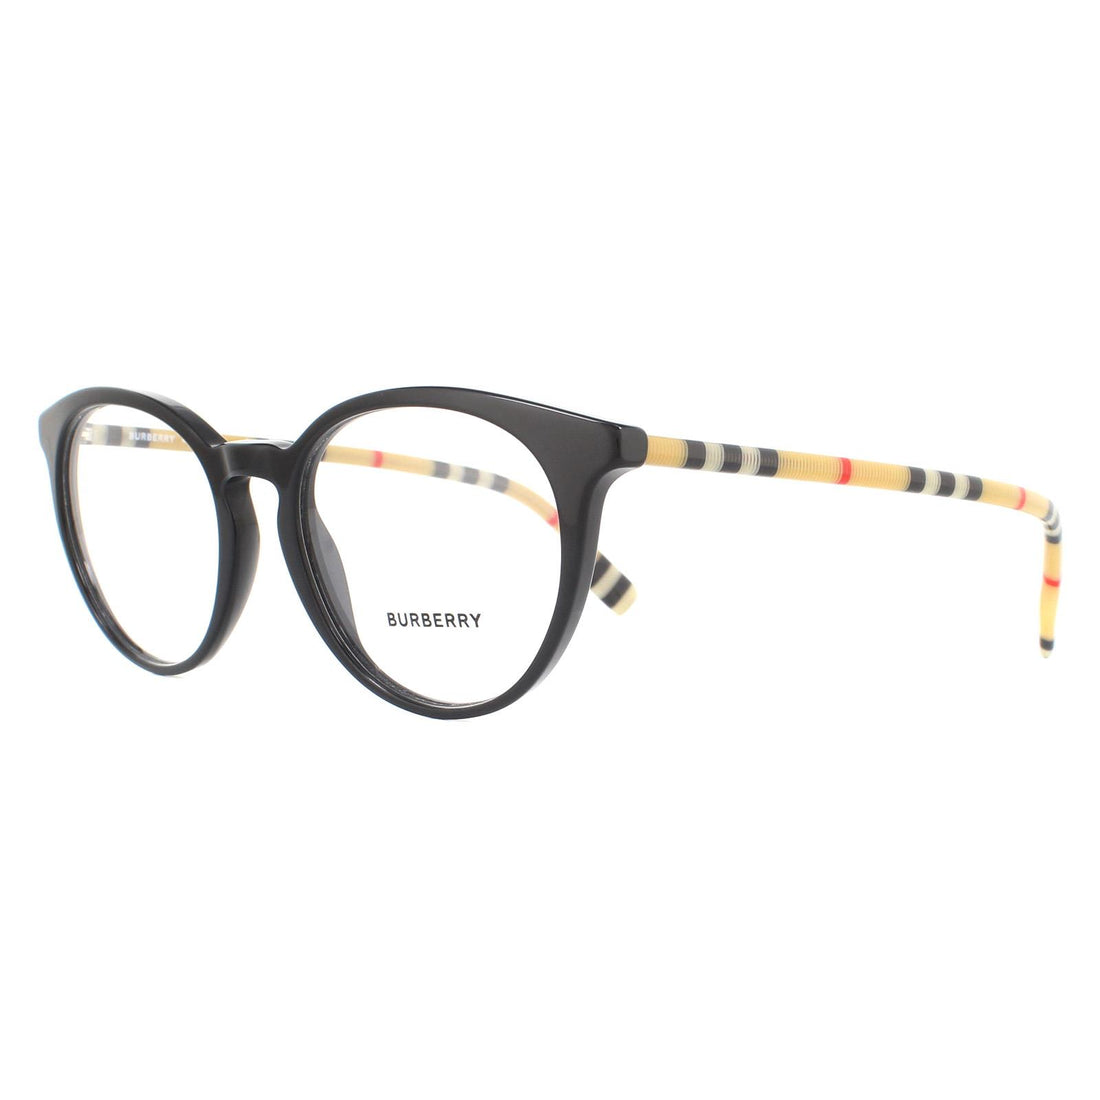 Burberry Glasses Frames BE2318 3853 Black with Burberry Check